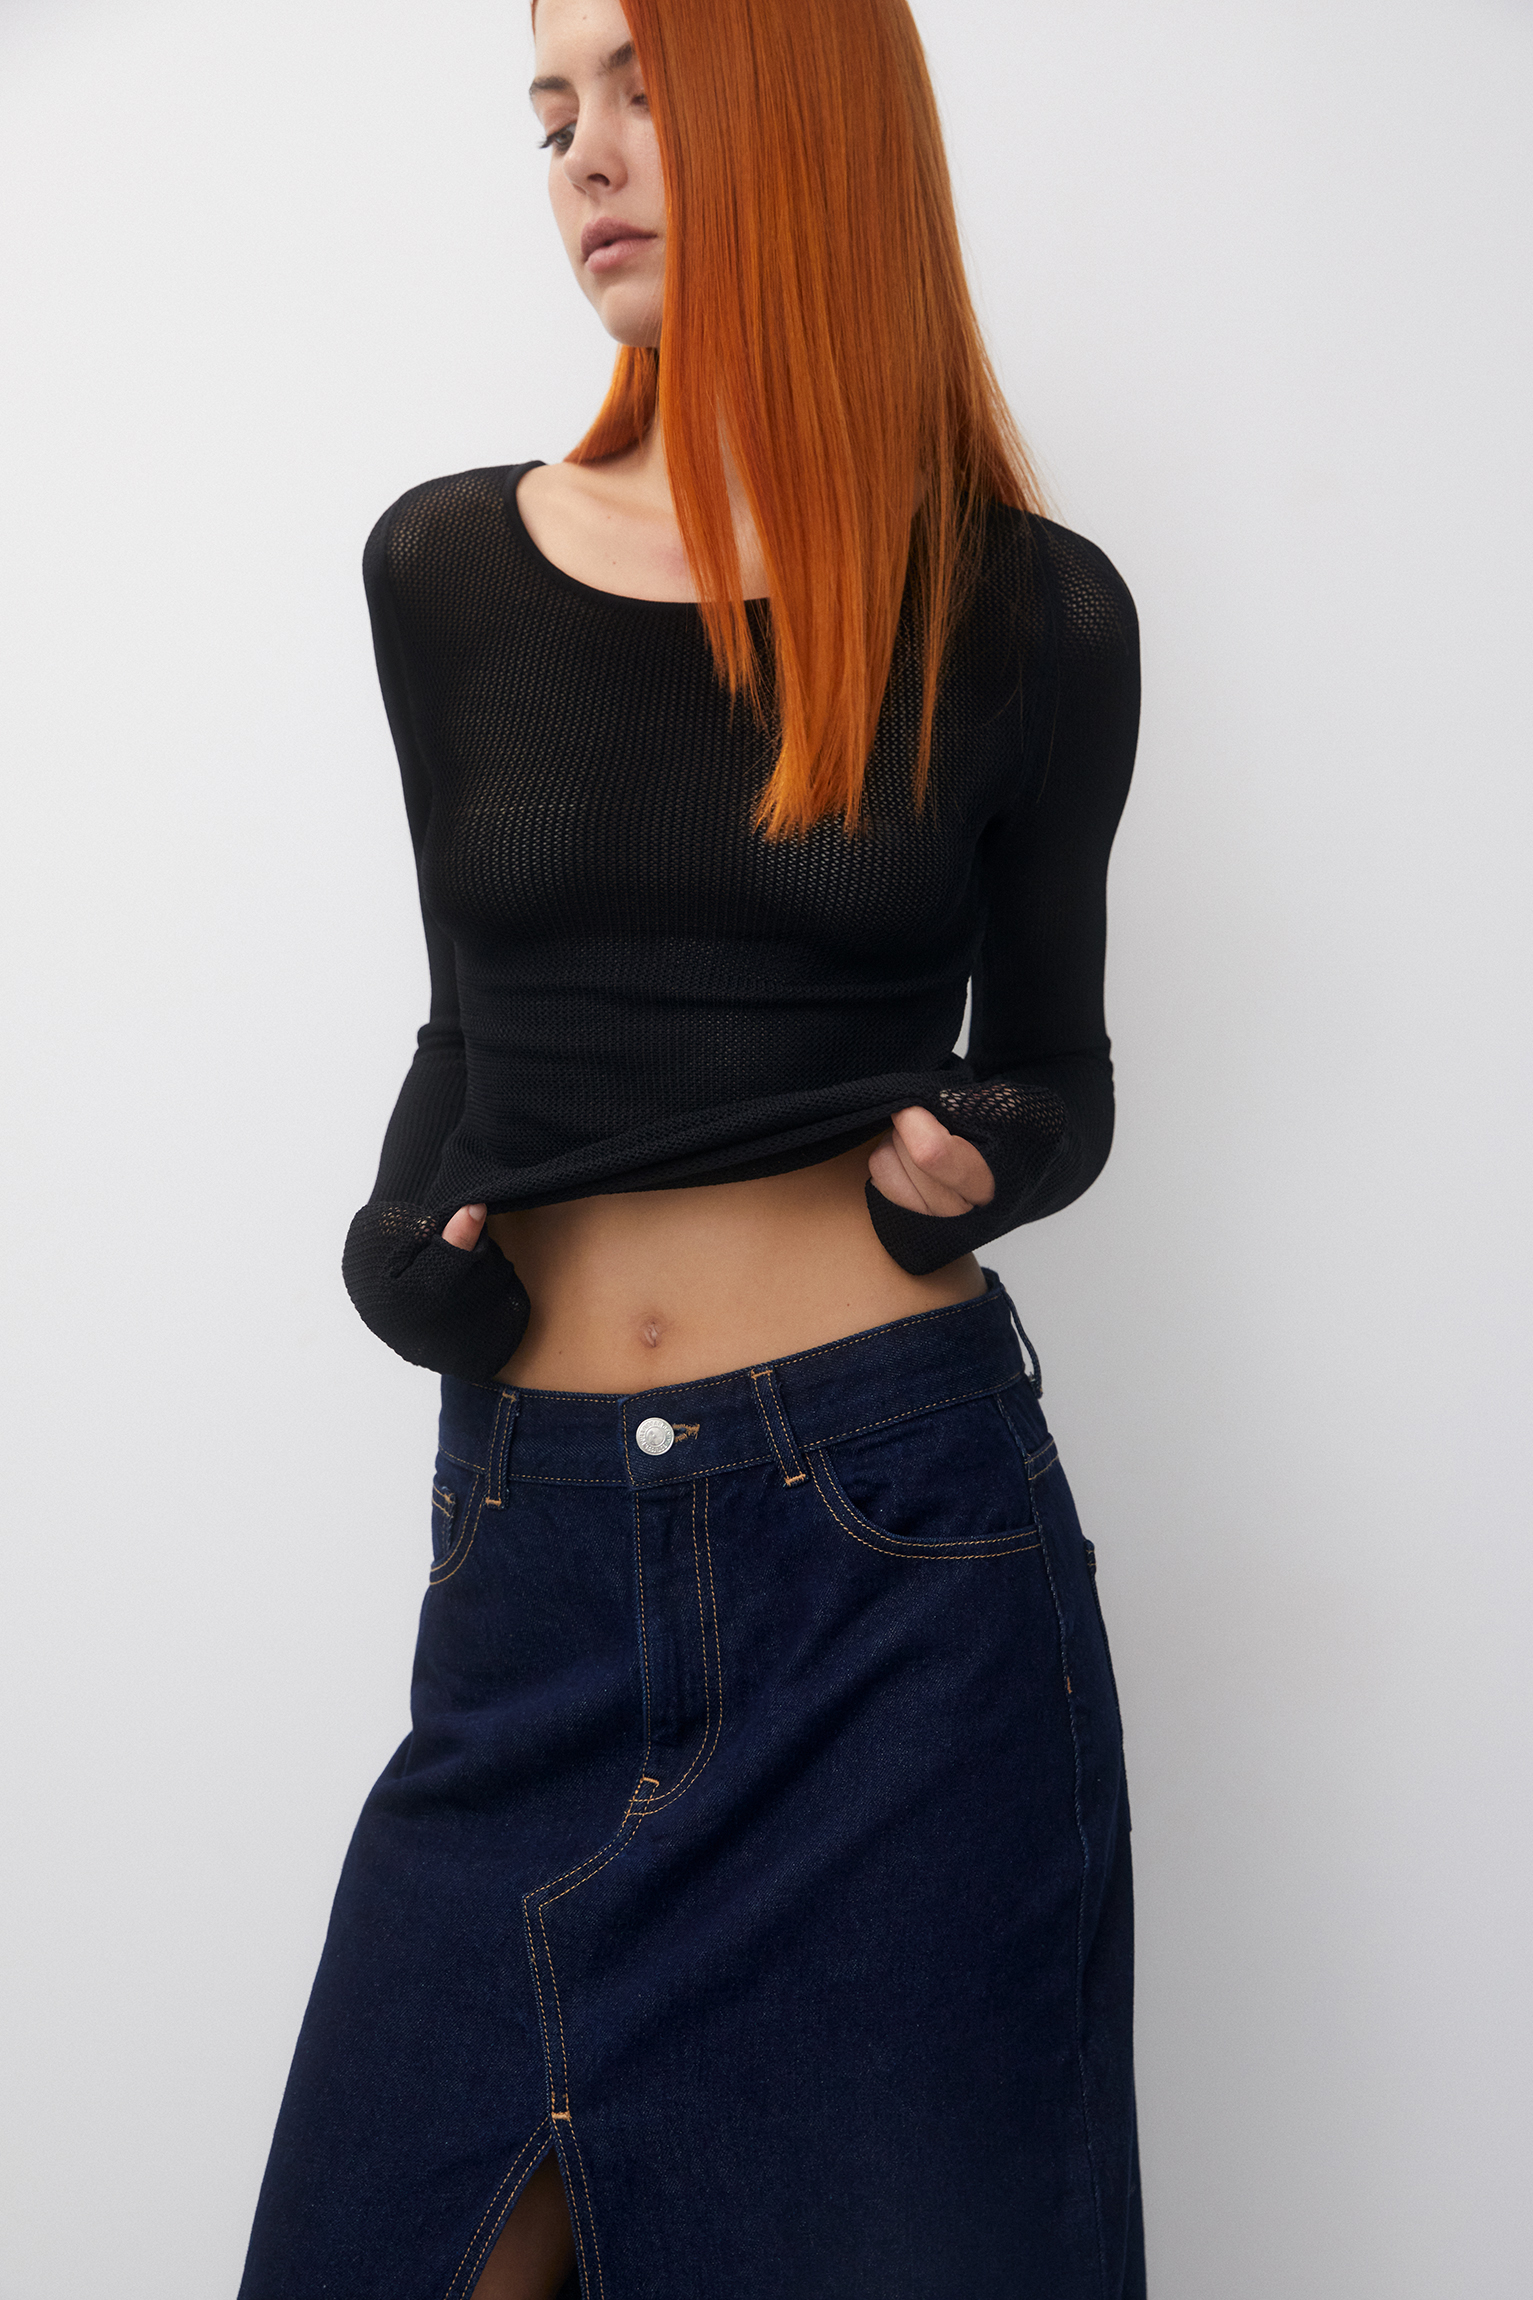 Buttoned denim skirt | Collection 2019 | subdued.com